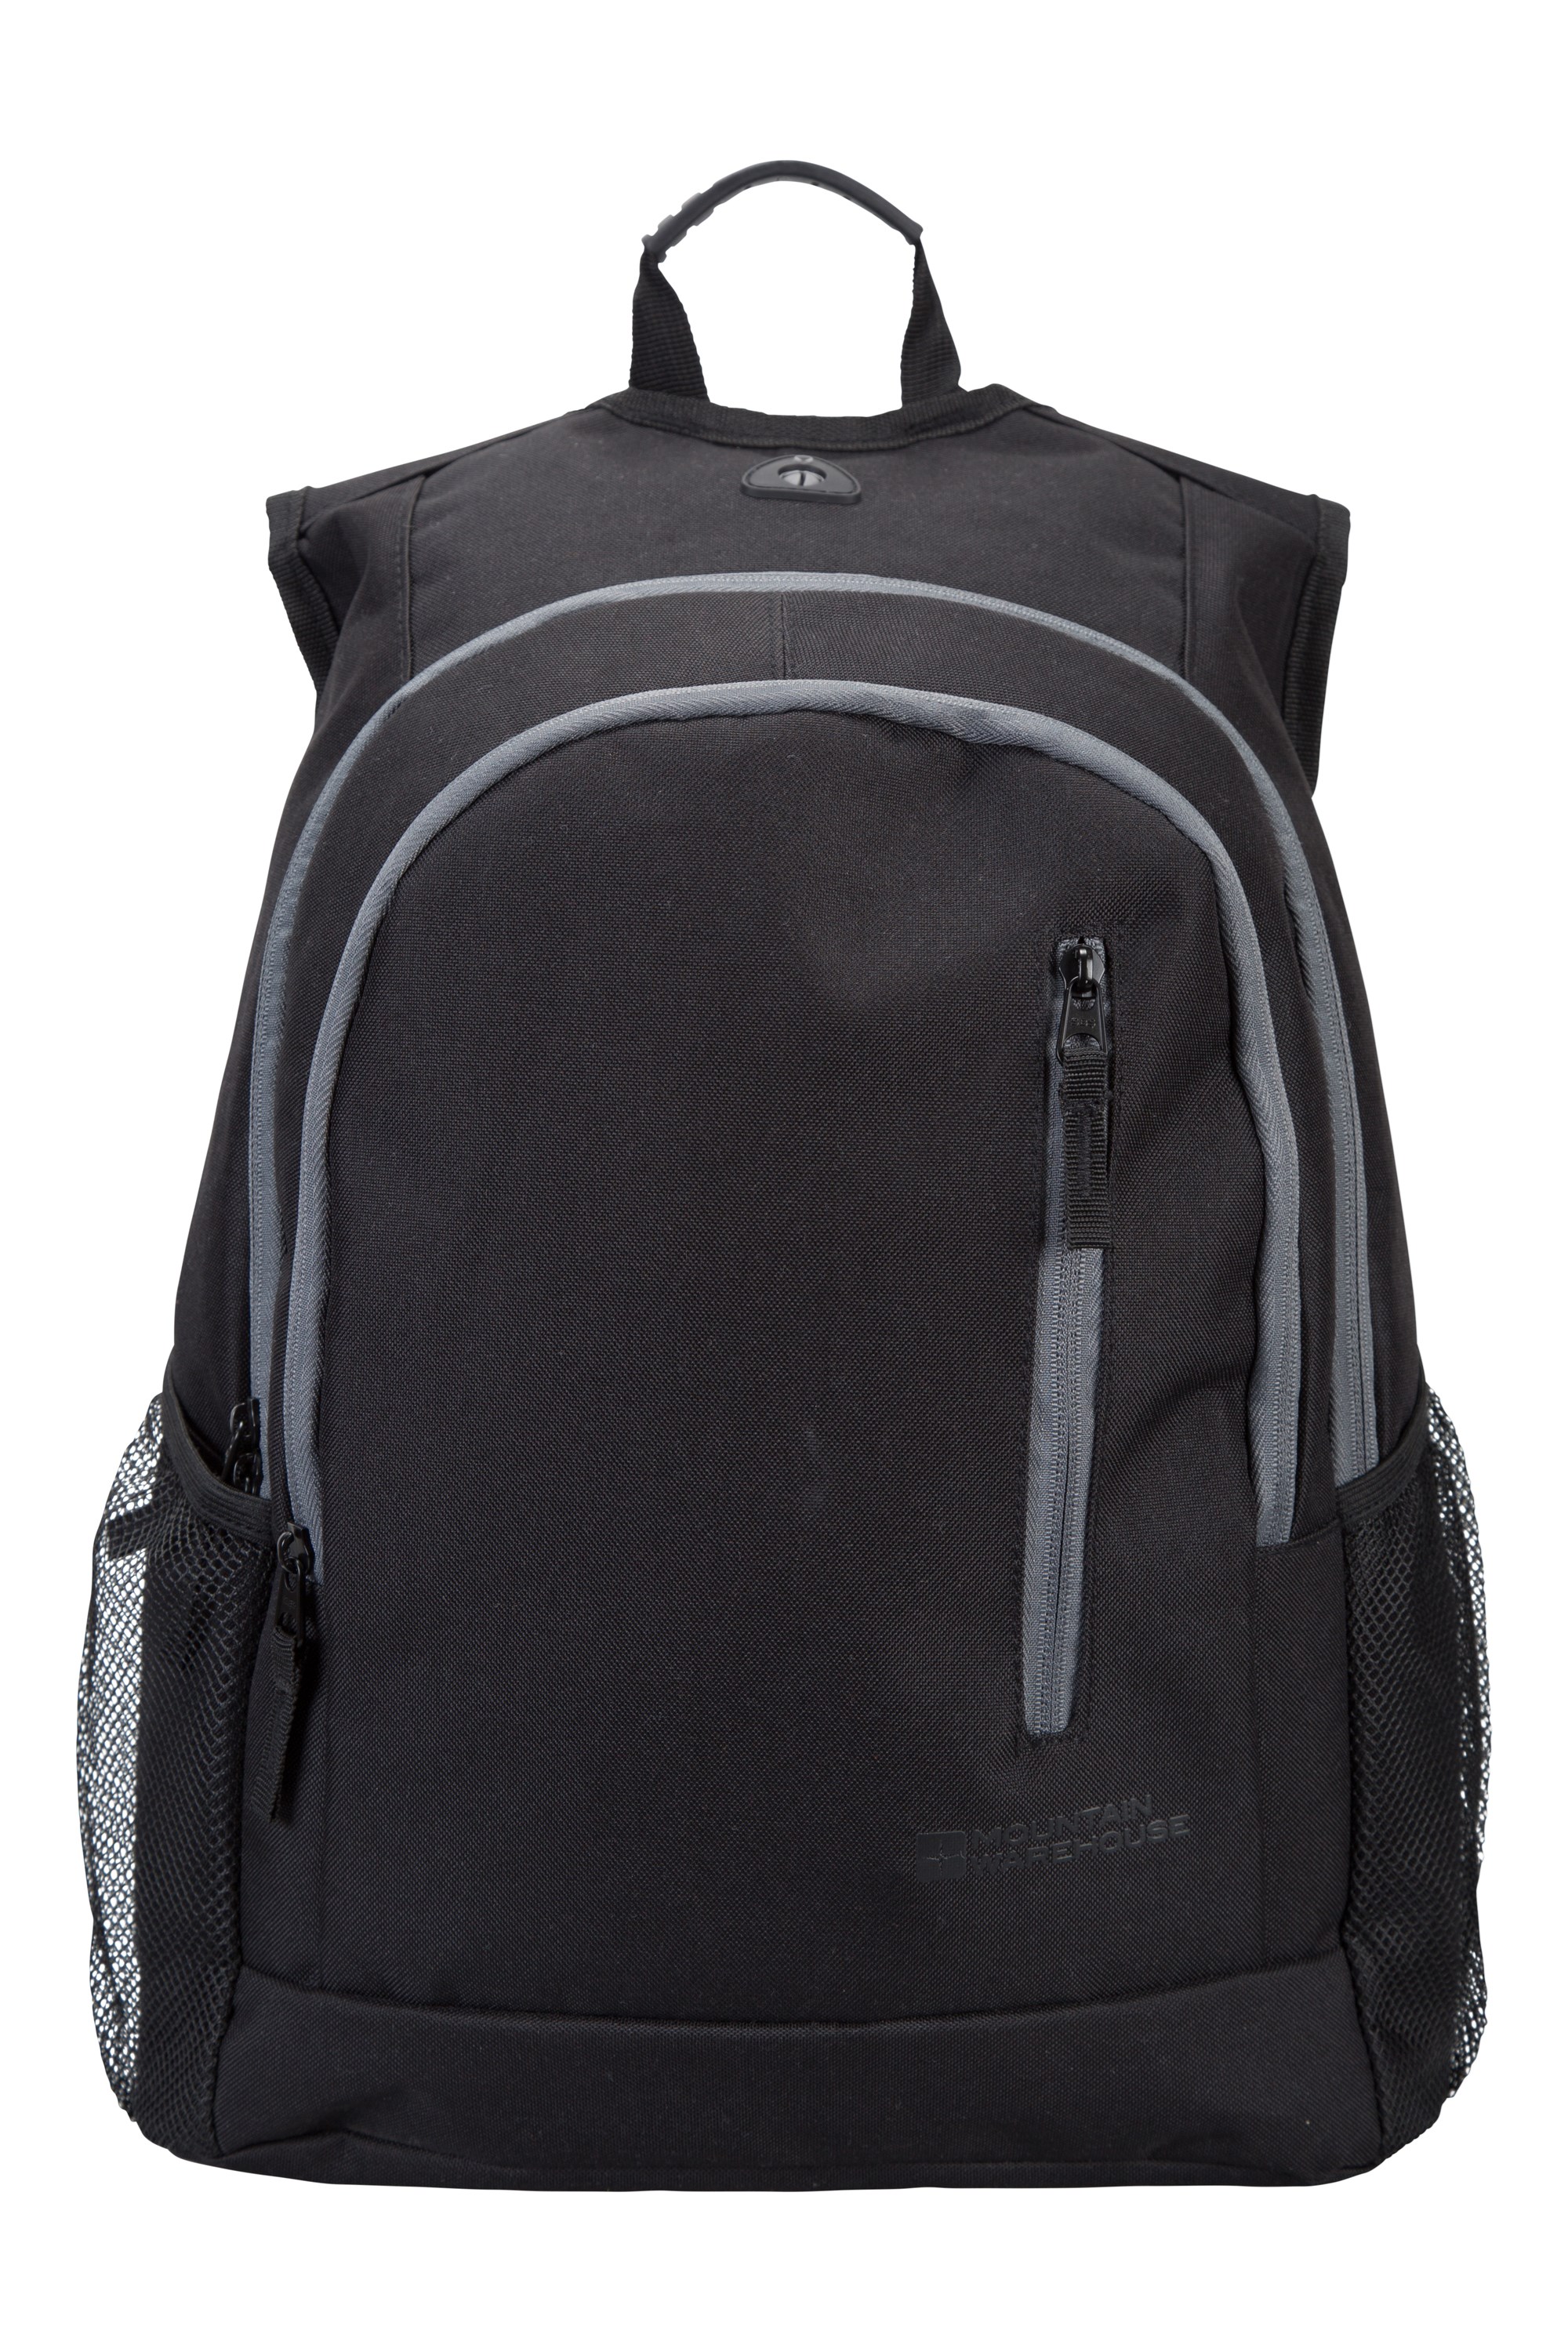 Fawkes 20 Litre Backpack